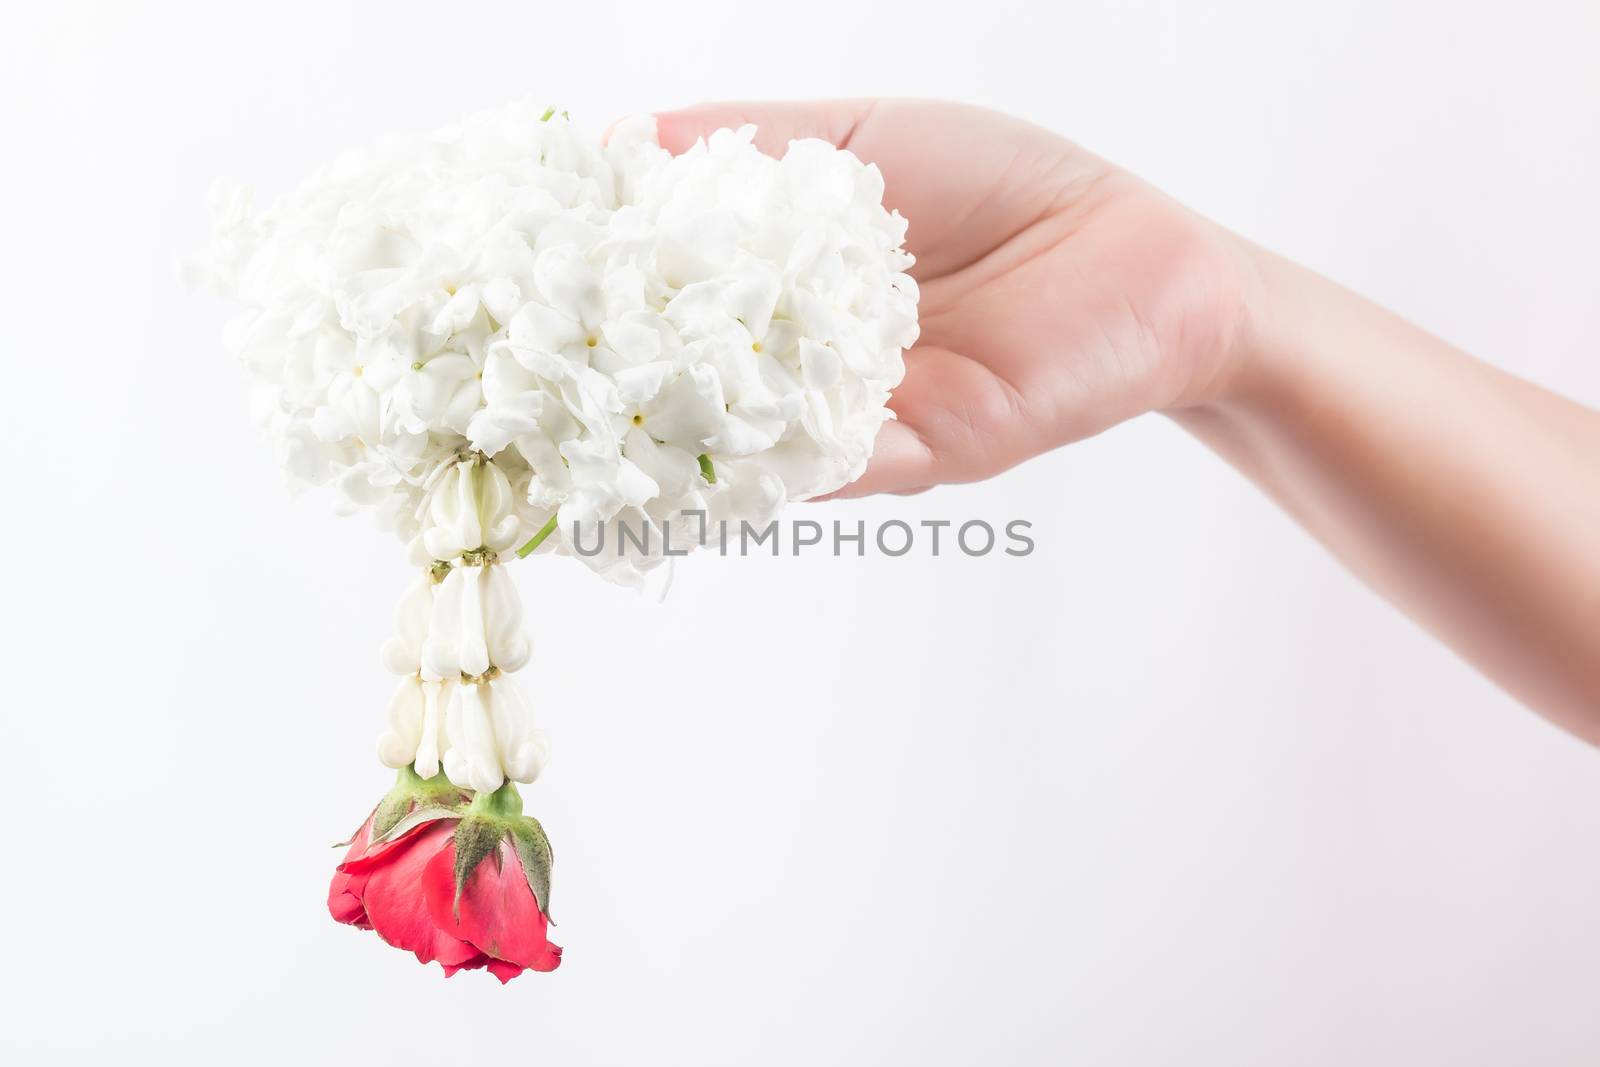 white garland on women hand is the meaning of "welcome" in Thailand